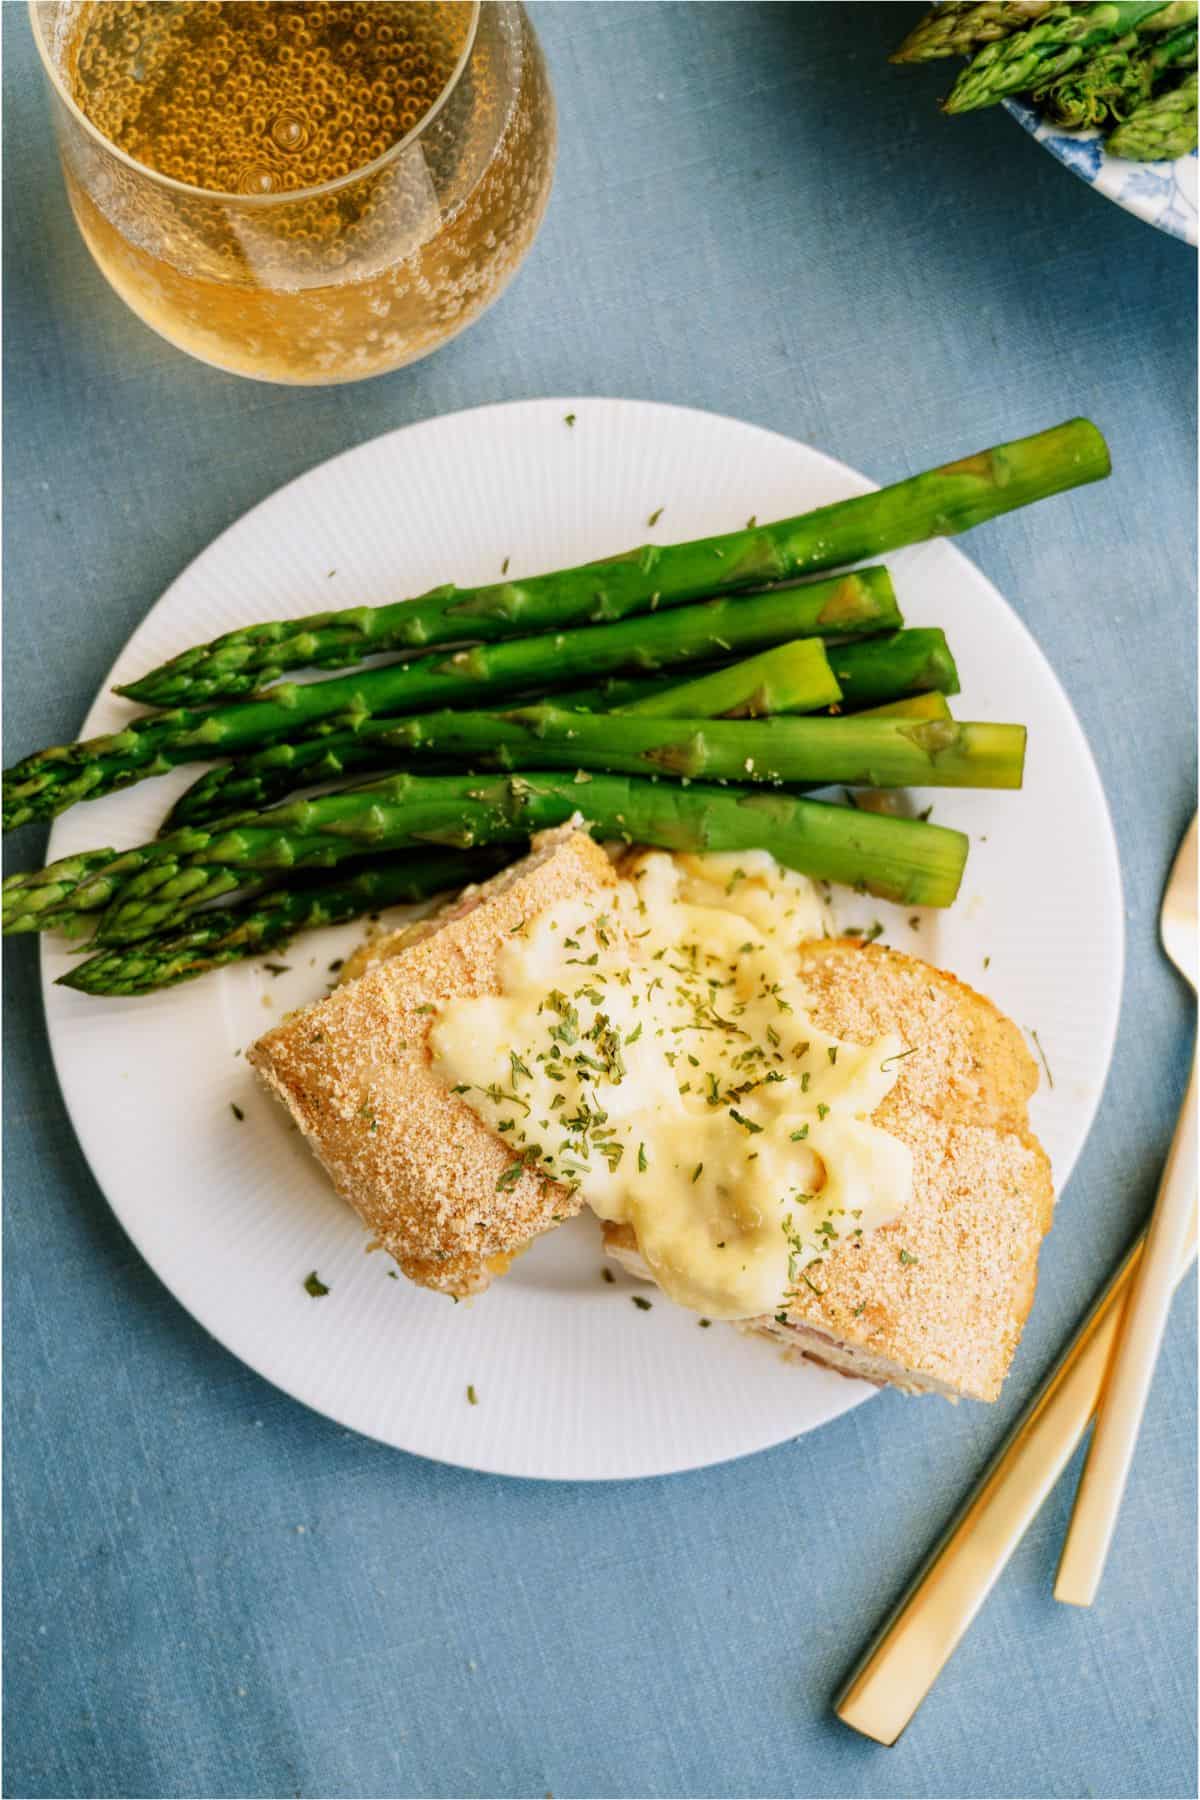 A plate with Malibu Stuffed Chicken and asparagus